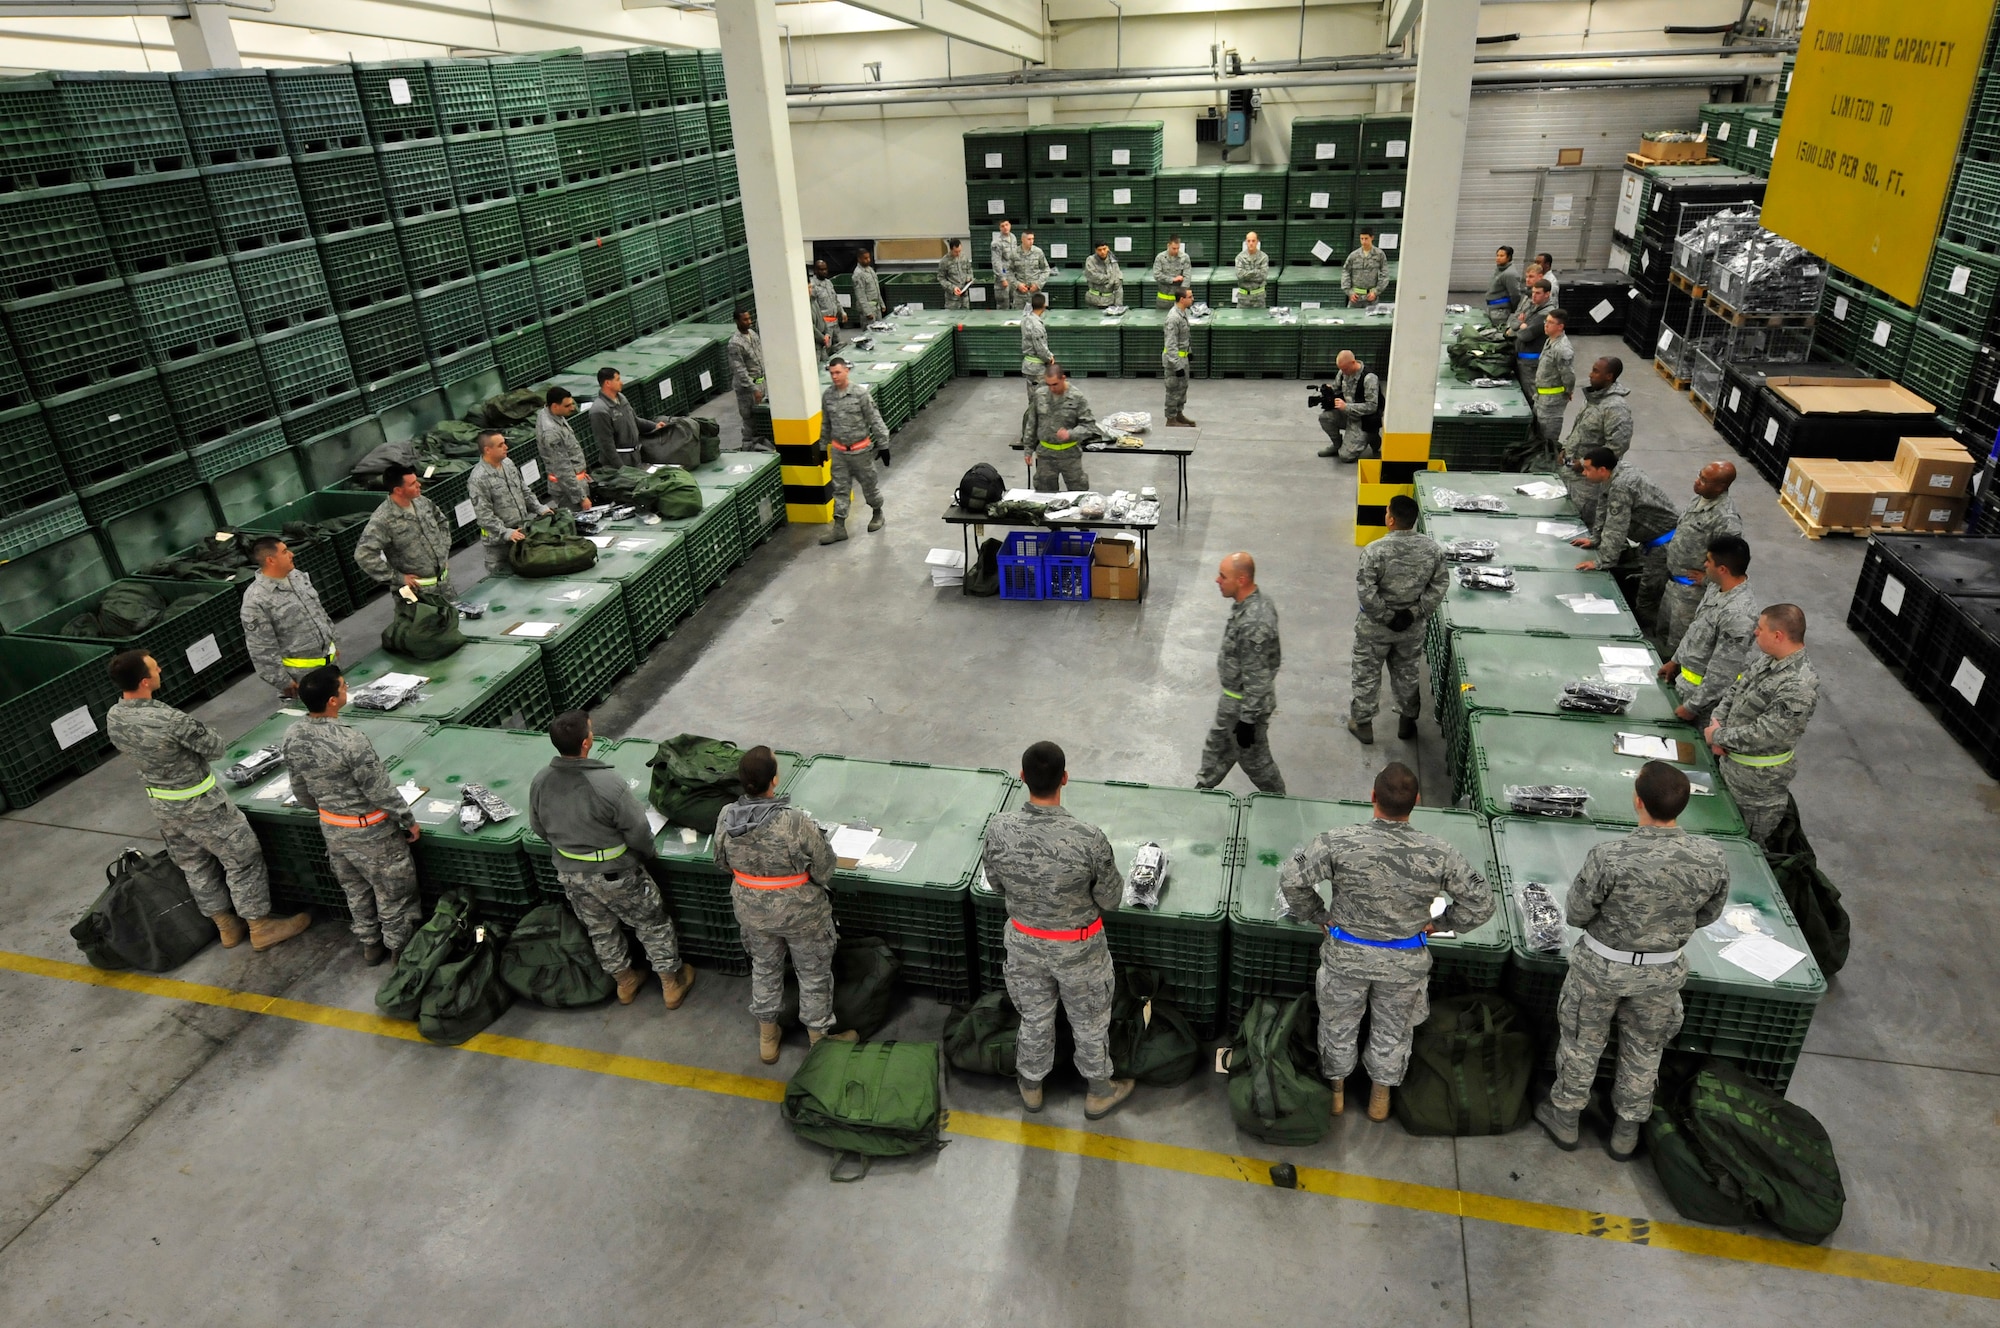 U.S. Air Force Airmen are issued individual protective equipment in
preparation for an Operational Readiness Inspection, Ramstein Air Base,
Germany, Sept. 28, 2010. Ramstein has been preparing for more than nine
months for the ORI, which is designed to test Airmen's ability to survive,
operate and perform fundamental duties in a war time environment. (U.S. Air
Force photo by Staff Sgt. Stephen J. Otero/Released)
